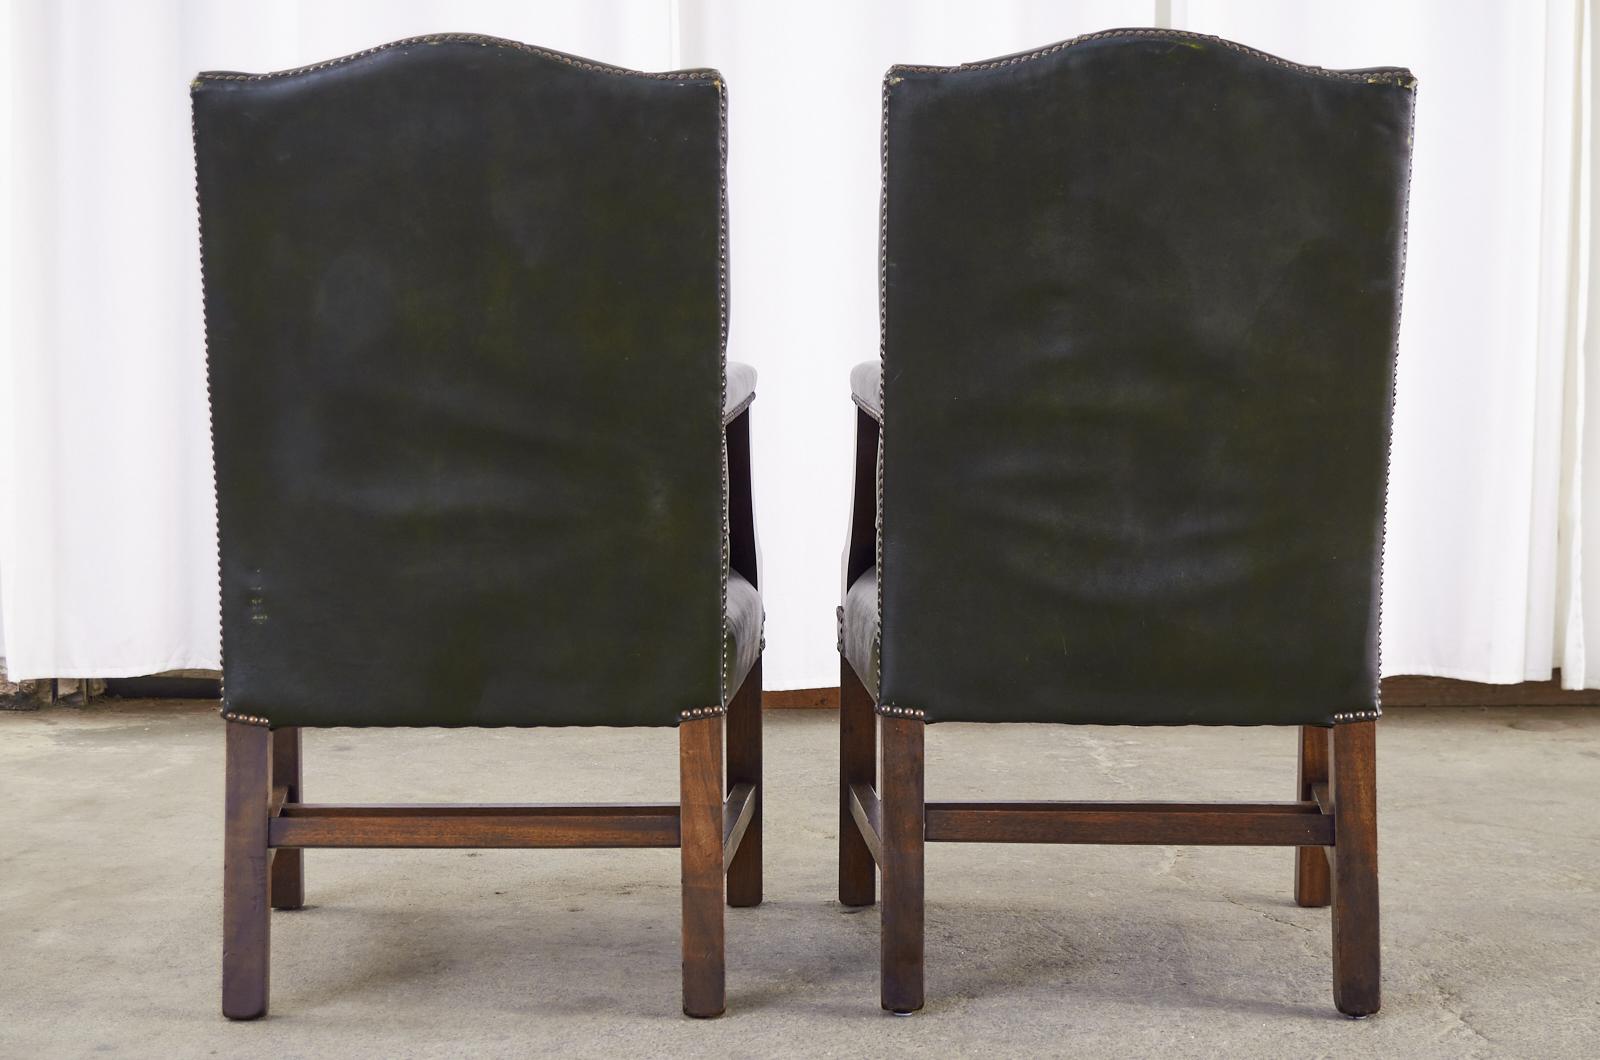 Pair of English Georgian Style Gainsborough Library Chairs  11